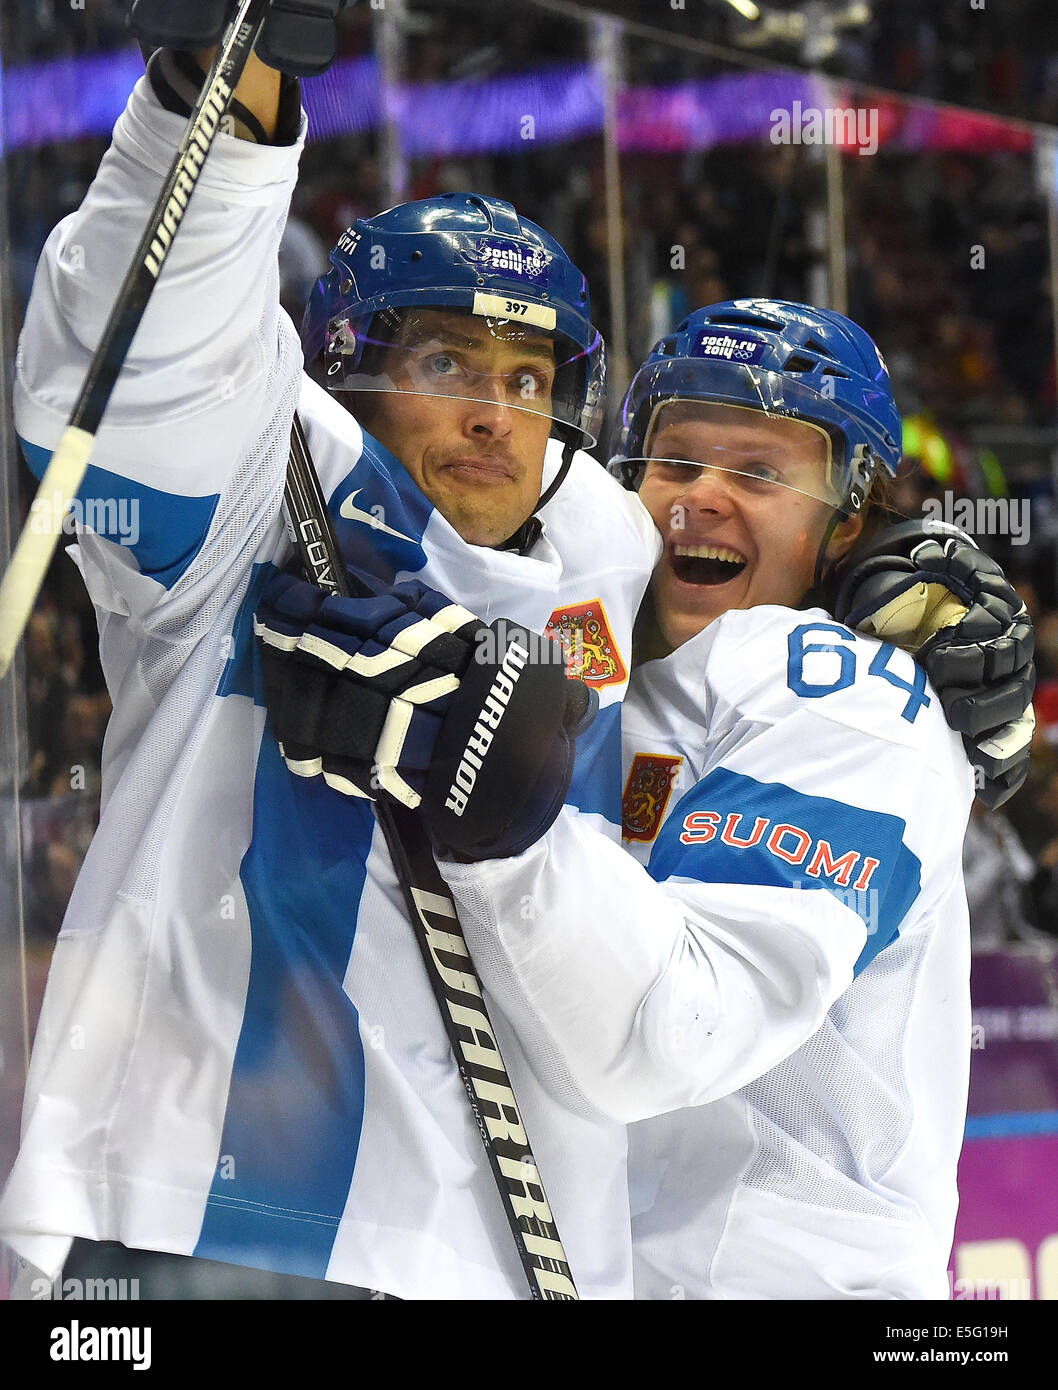 Finland forward Teemu Selanne (8), left, and forward Mikael Granlund (64) celebrate Selanne's goal against USA goalie Jonathan Quick (32) during the second period of the men's Bronze Medal hockey game at the Winter Olympics in Sochi, Russia, Saturday, February 22, 2014. Finland defeated USA 5-0 to capture the Bronze Medal.  (Harry E. Walker/MCT) Stock Photo